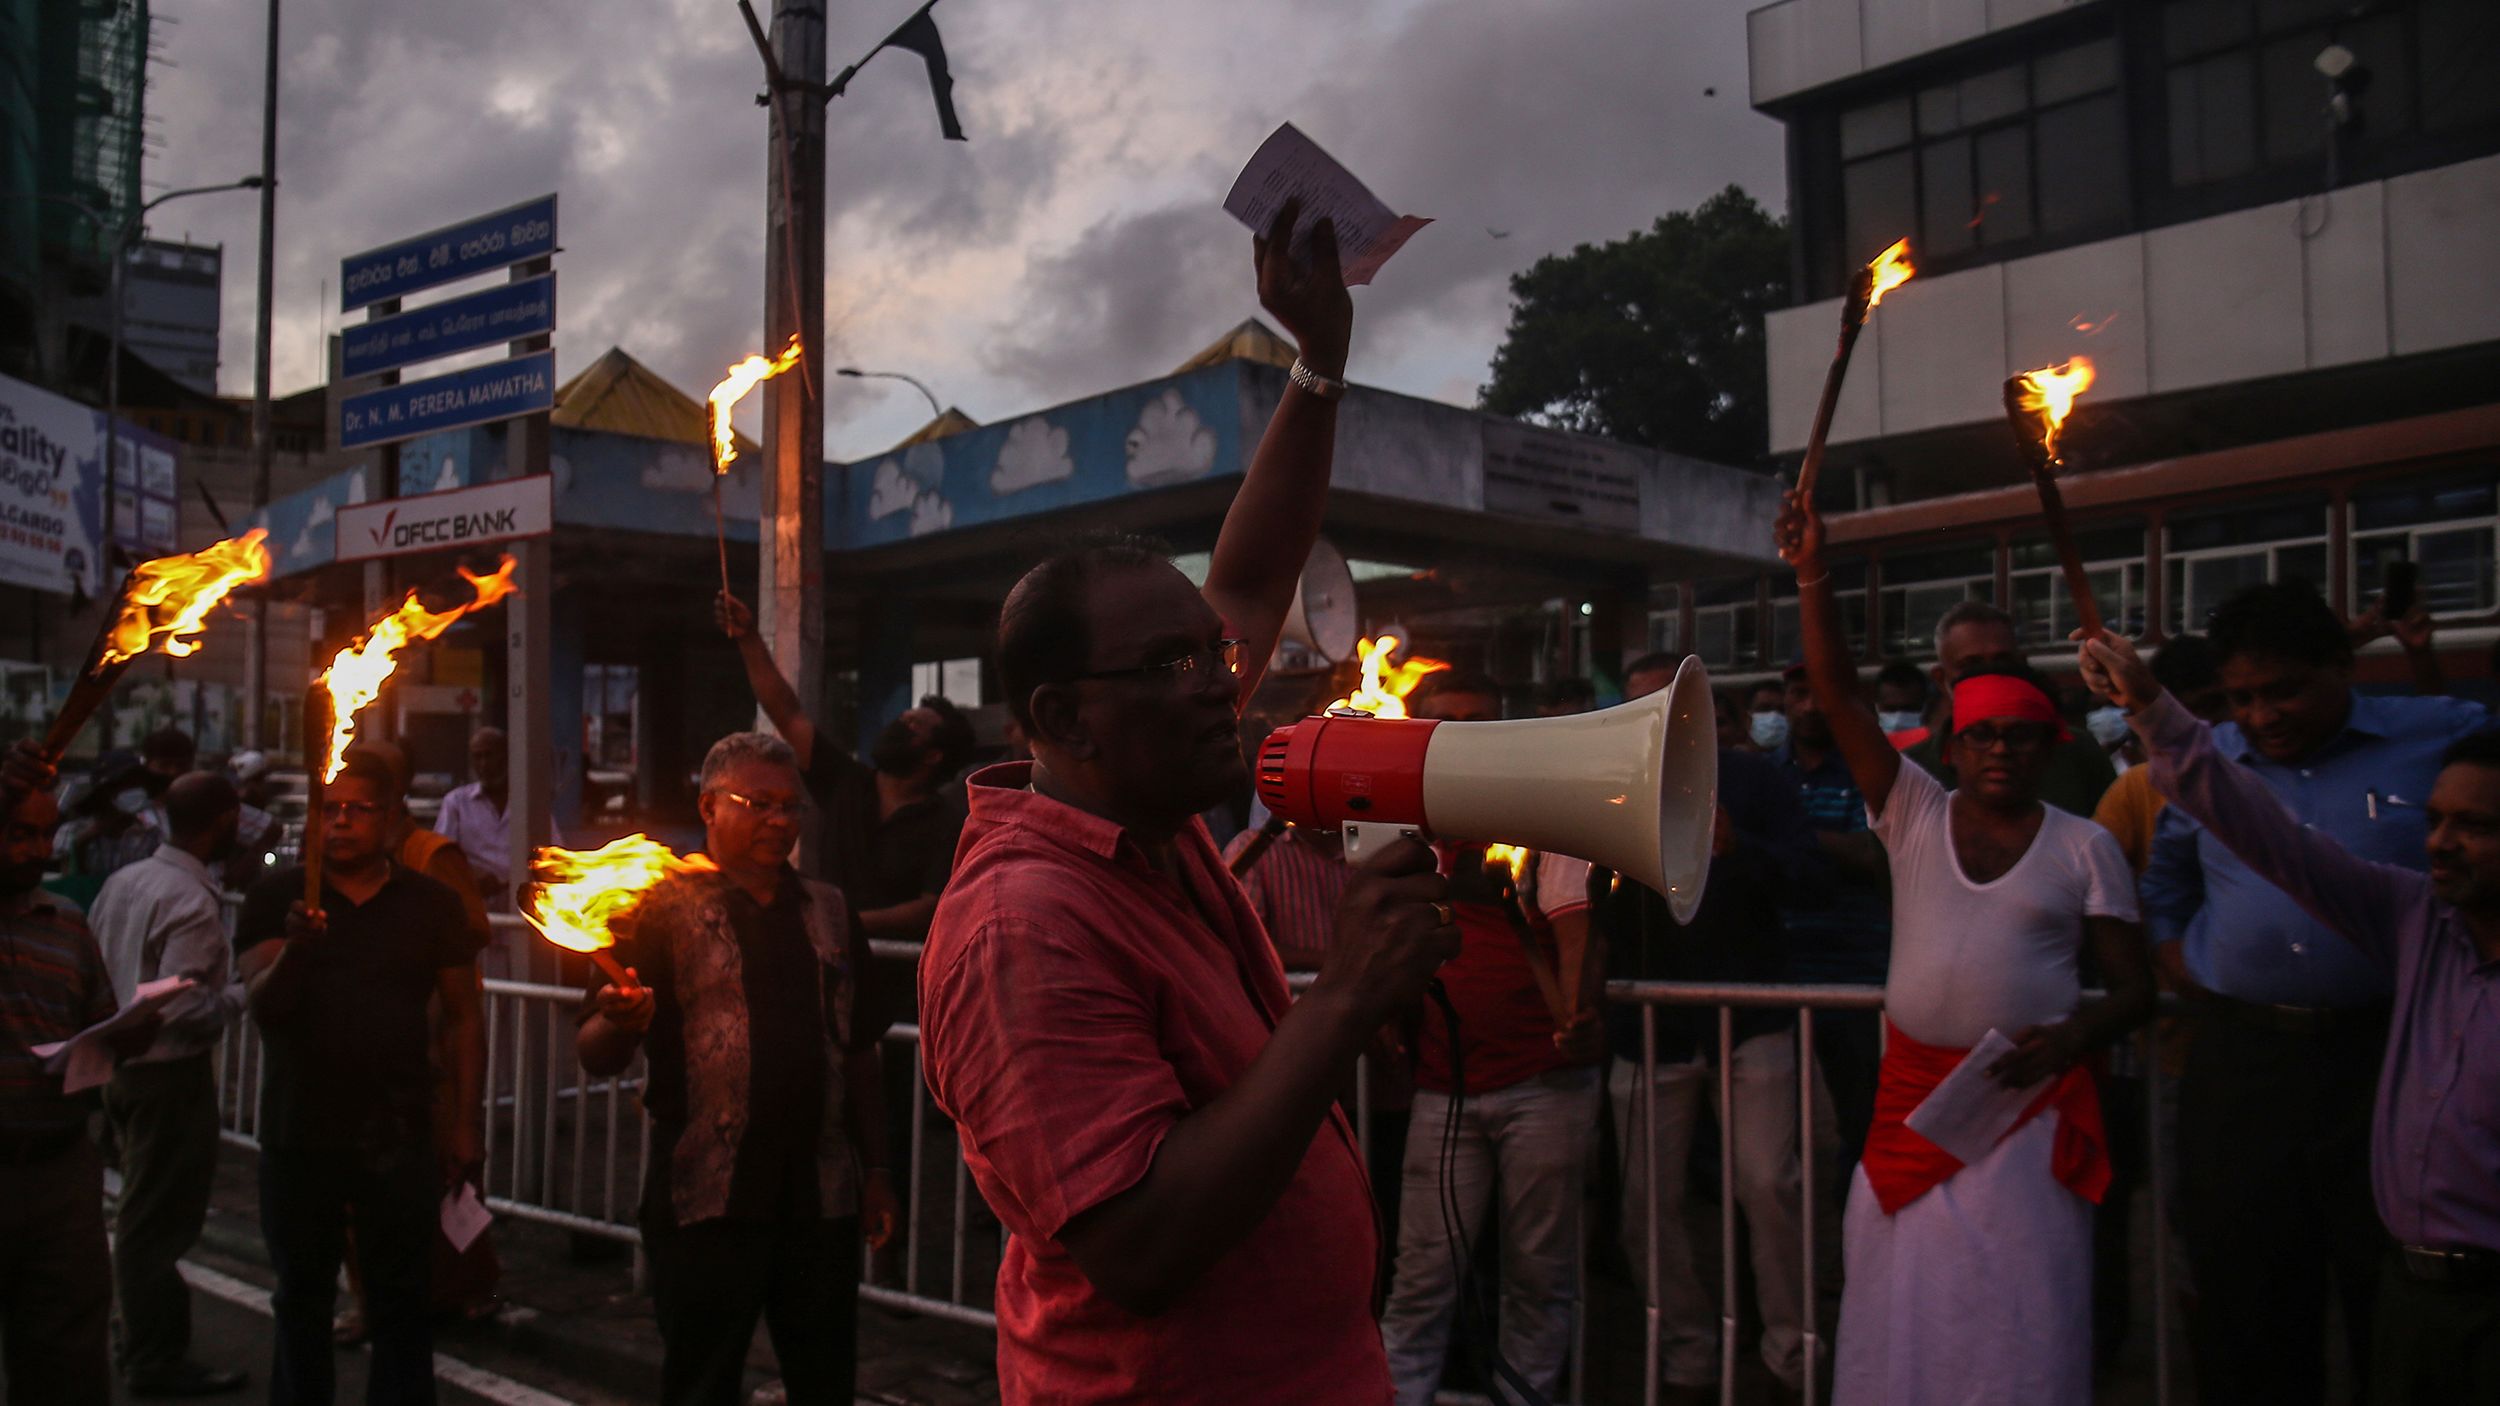 People protest against rising living costs, amid Sri Lanka's economic crisis, in Colombo on June 27.